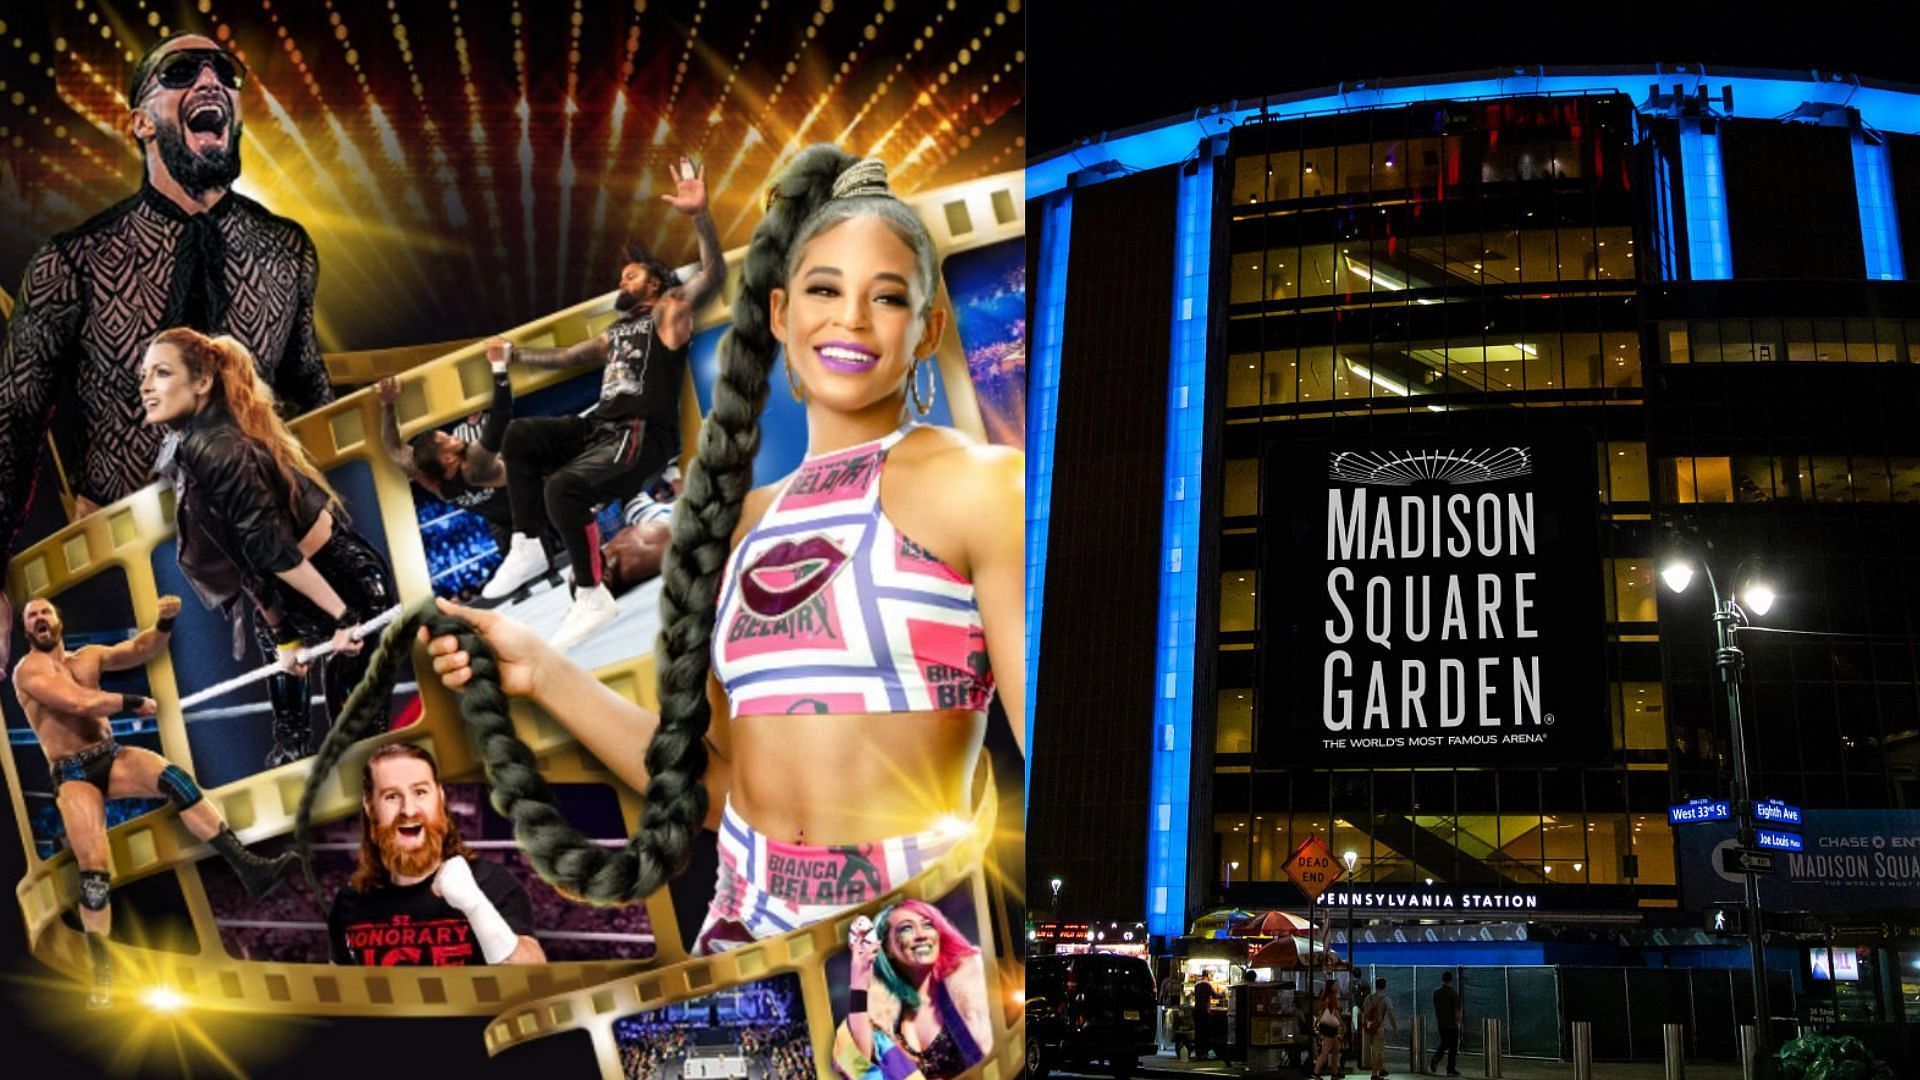 WWE will be holding a live event in Madison Square Garden on March 12th.